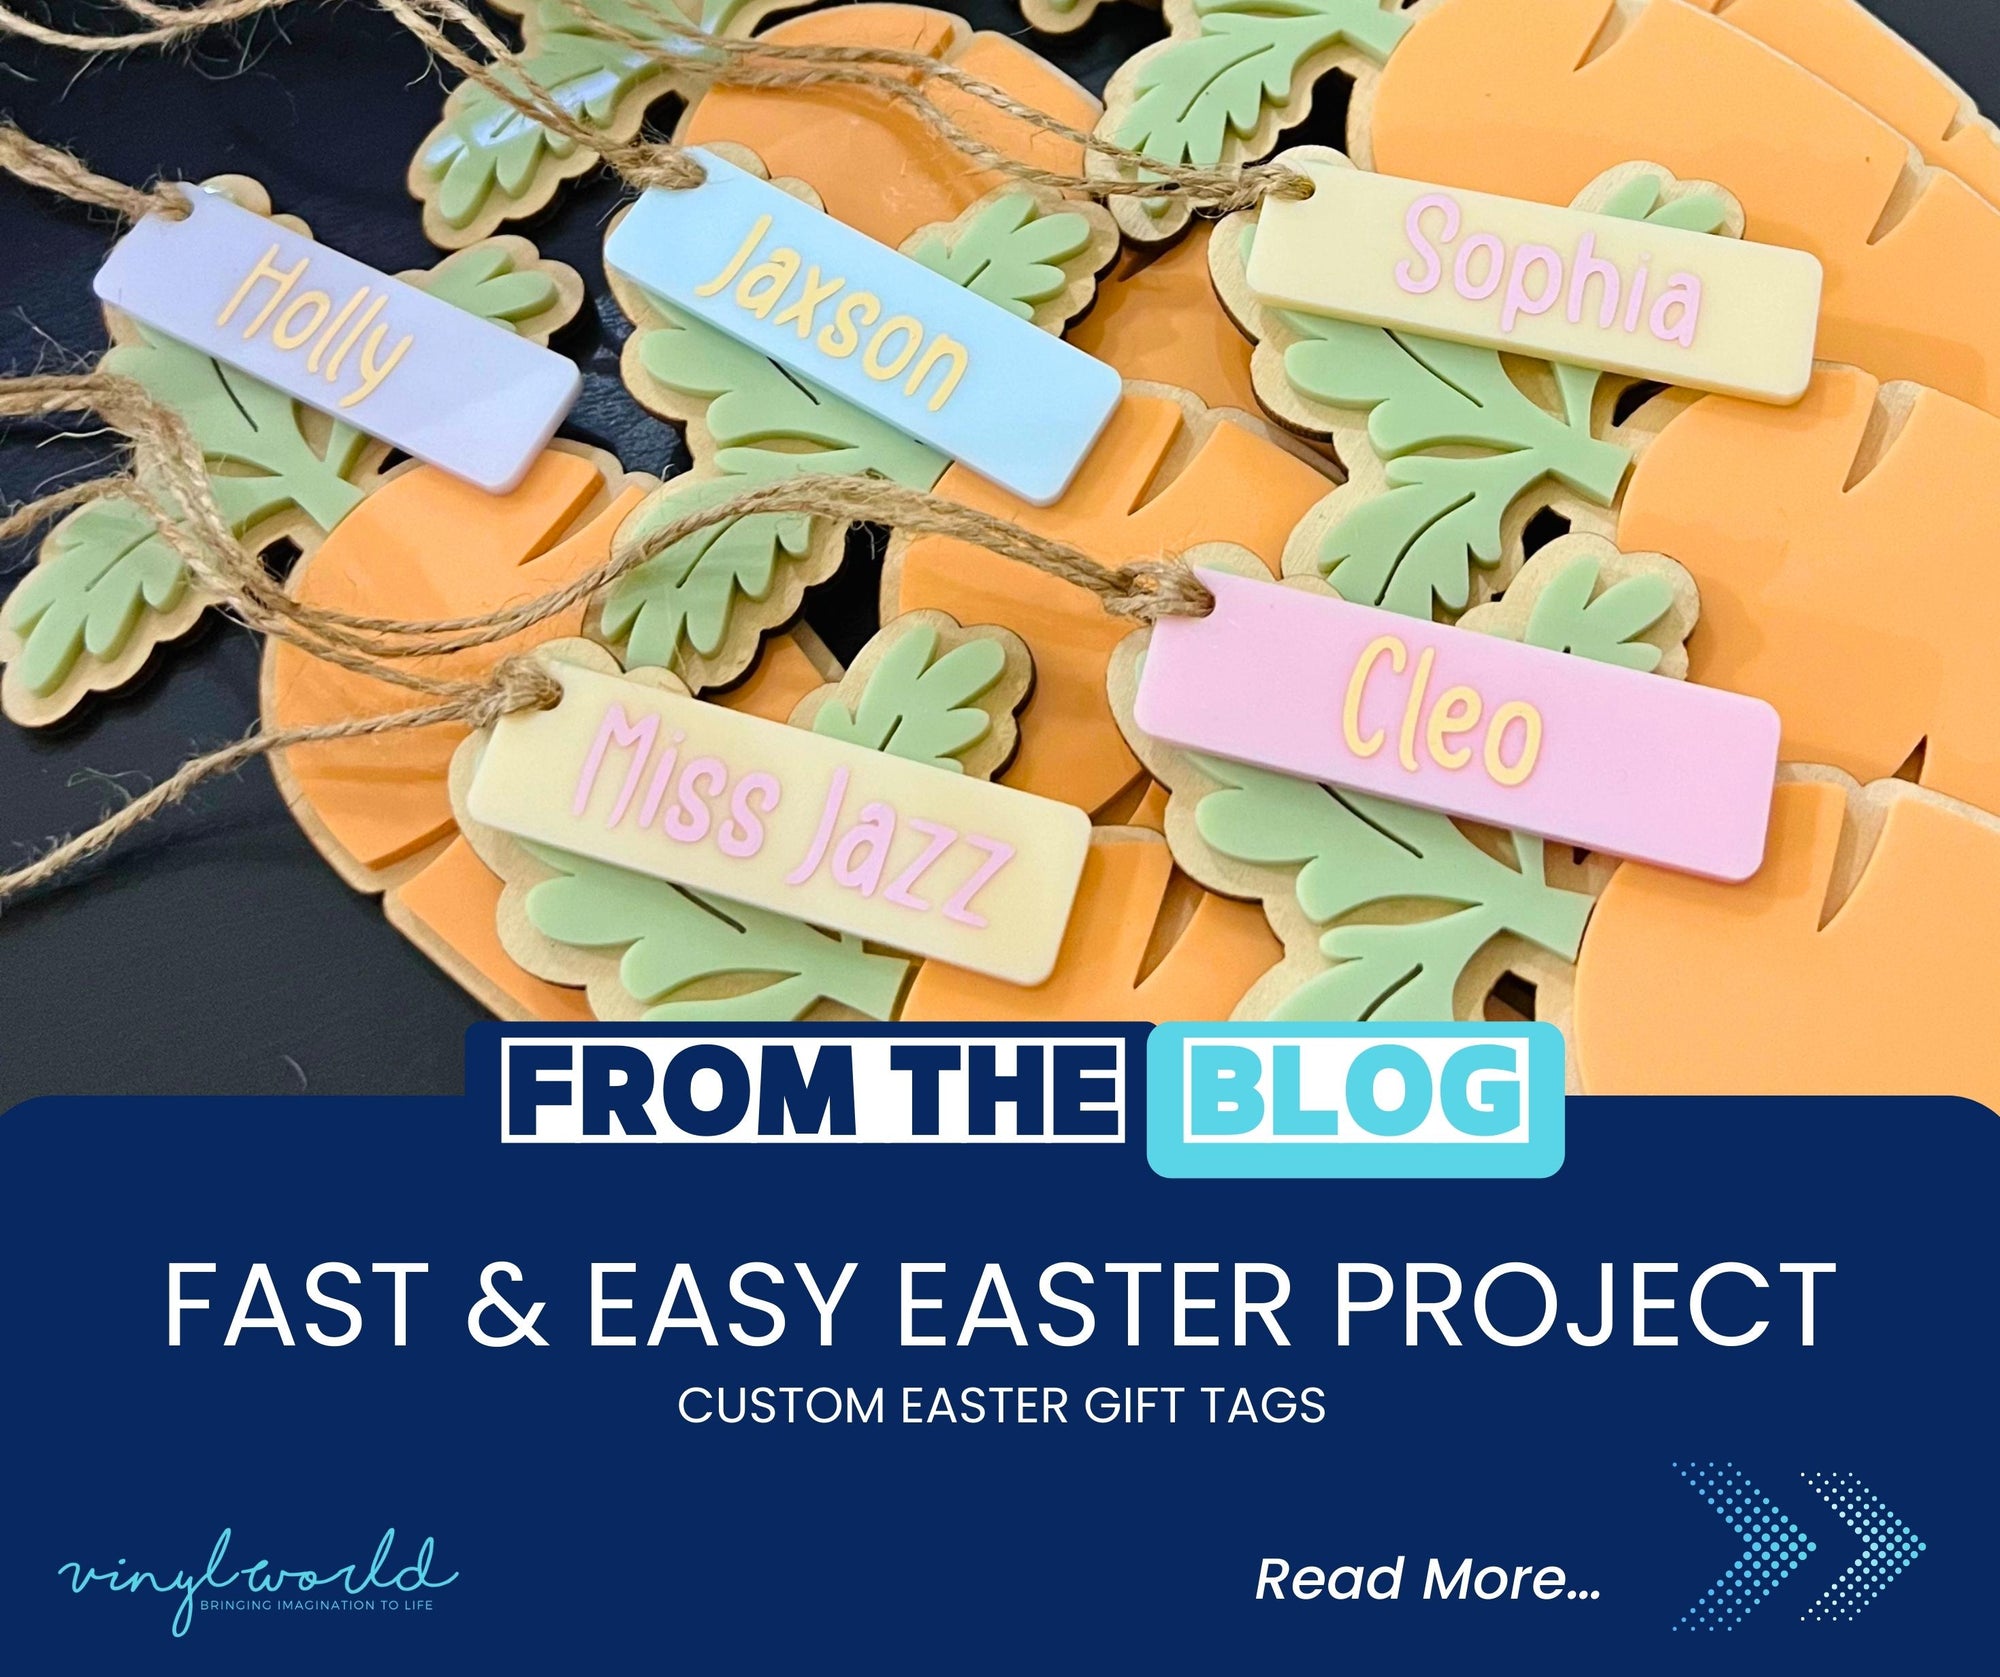 Fast & Easy Easter Project! - Custom Gift Tags